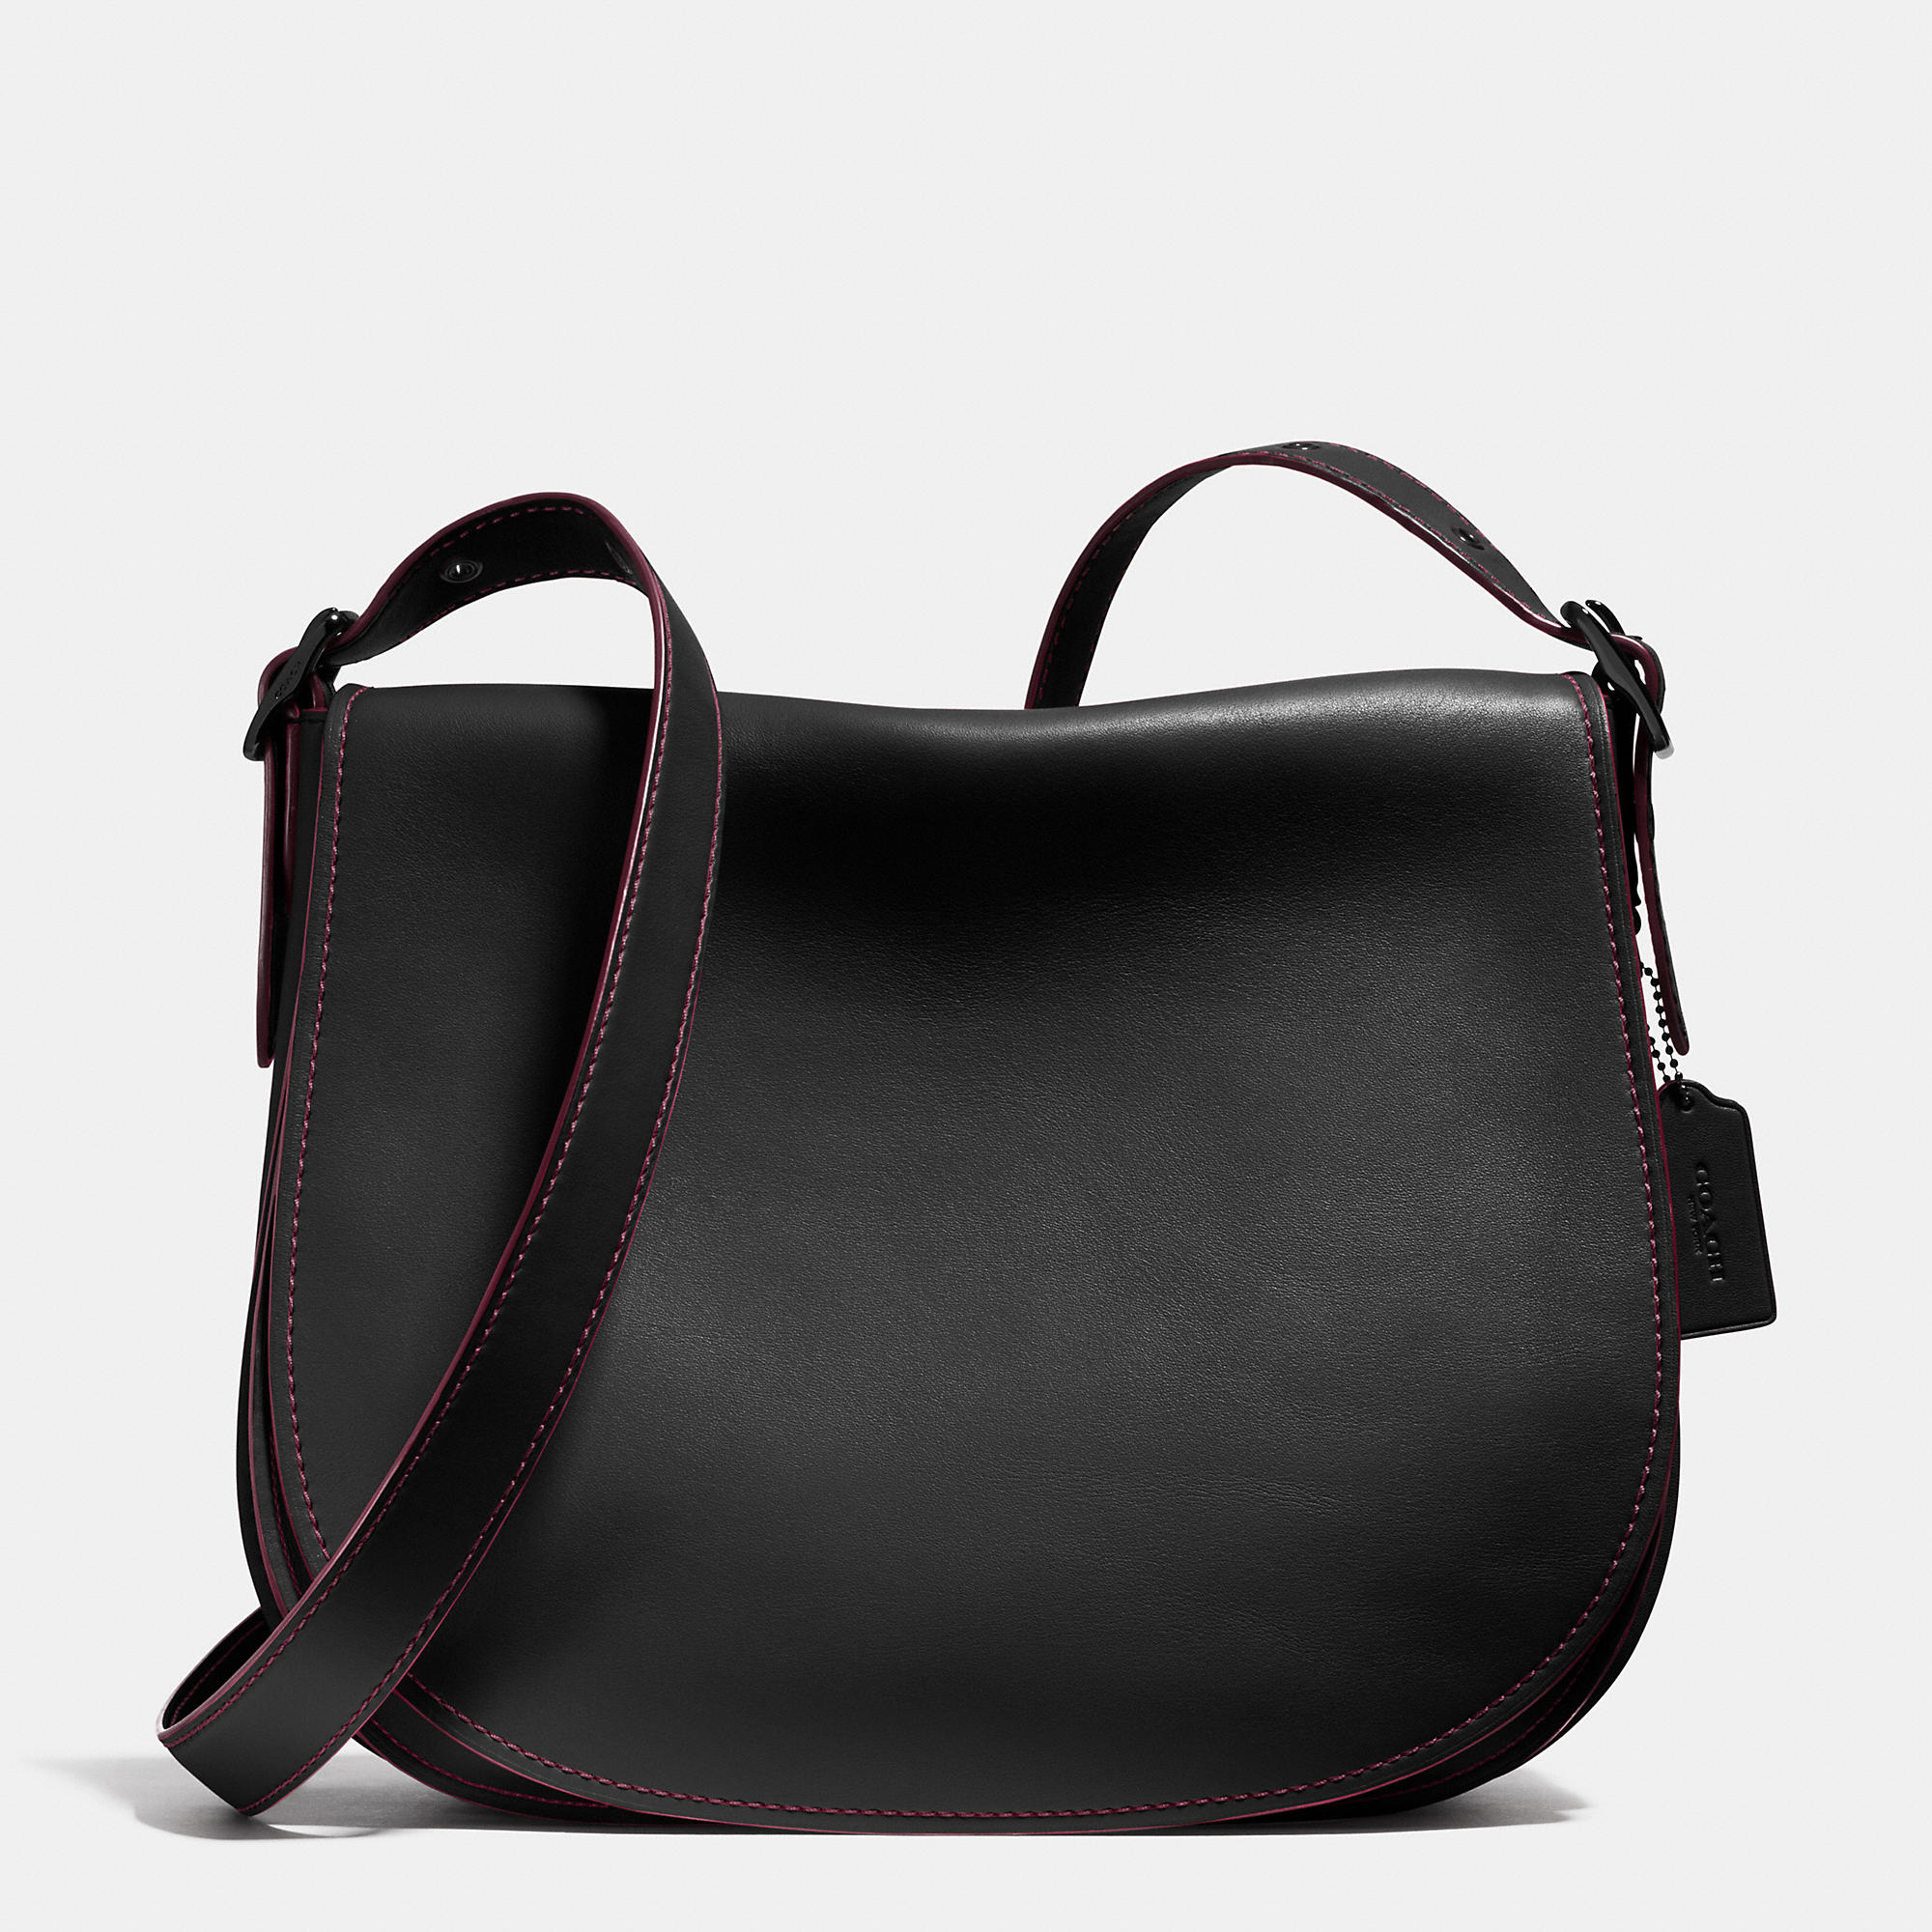 Lyst - Coach Saddle Bag 35 In Glovetanned Leather in Black